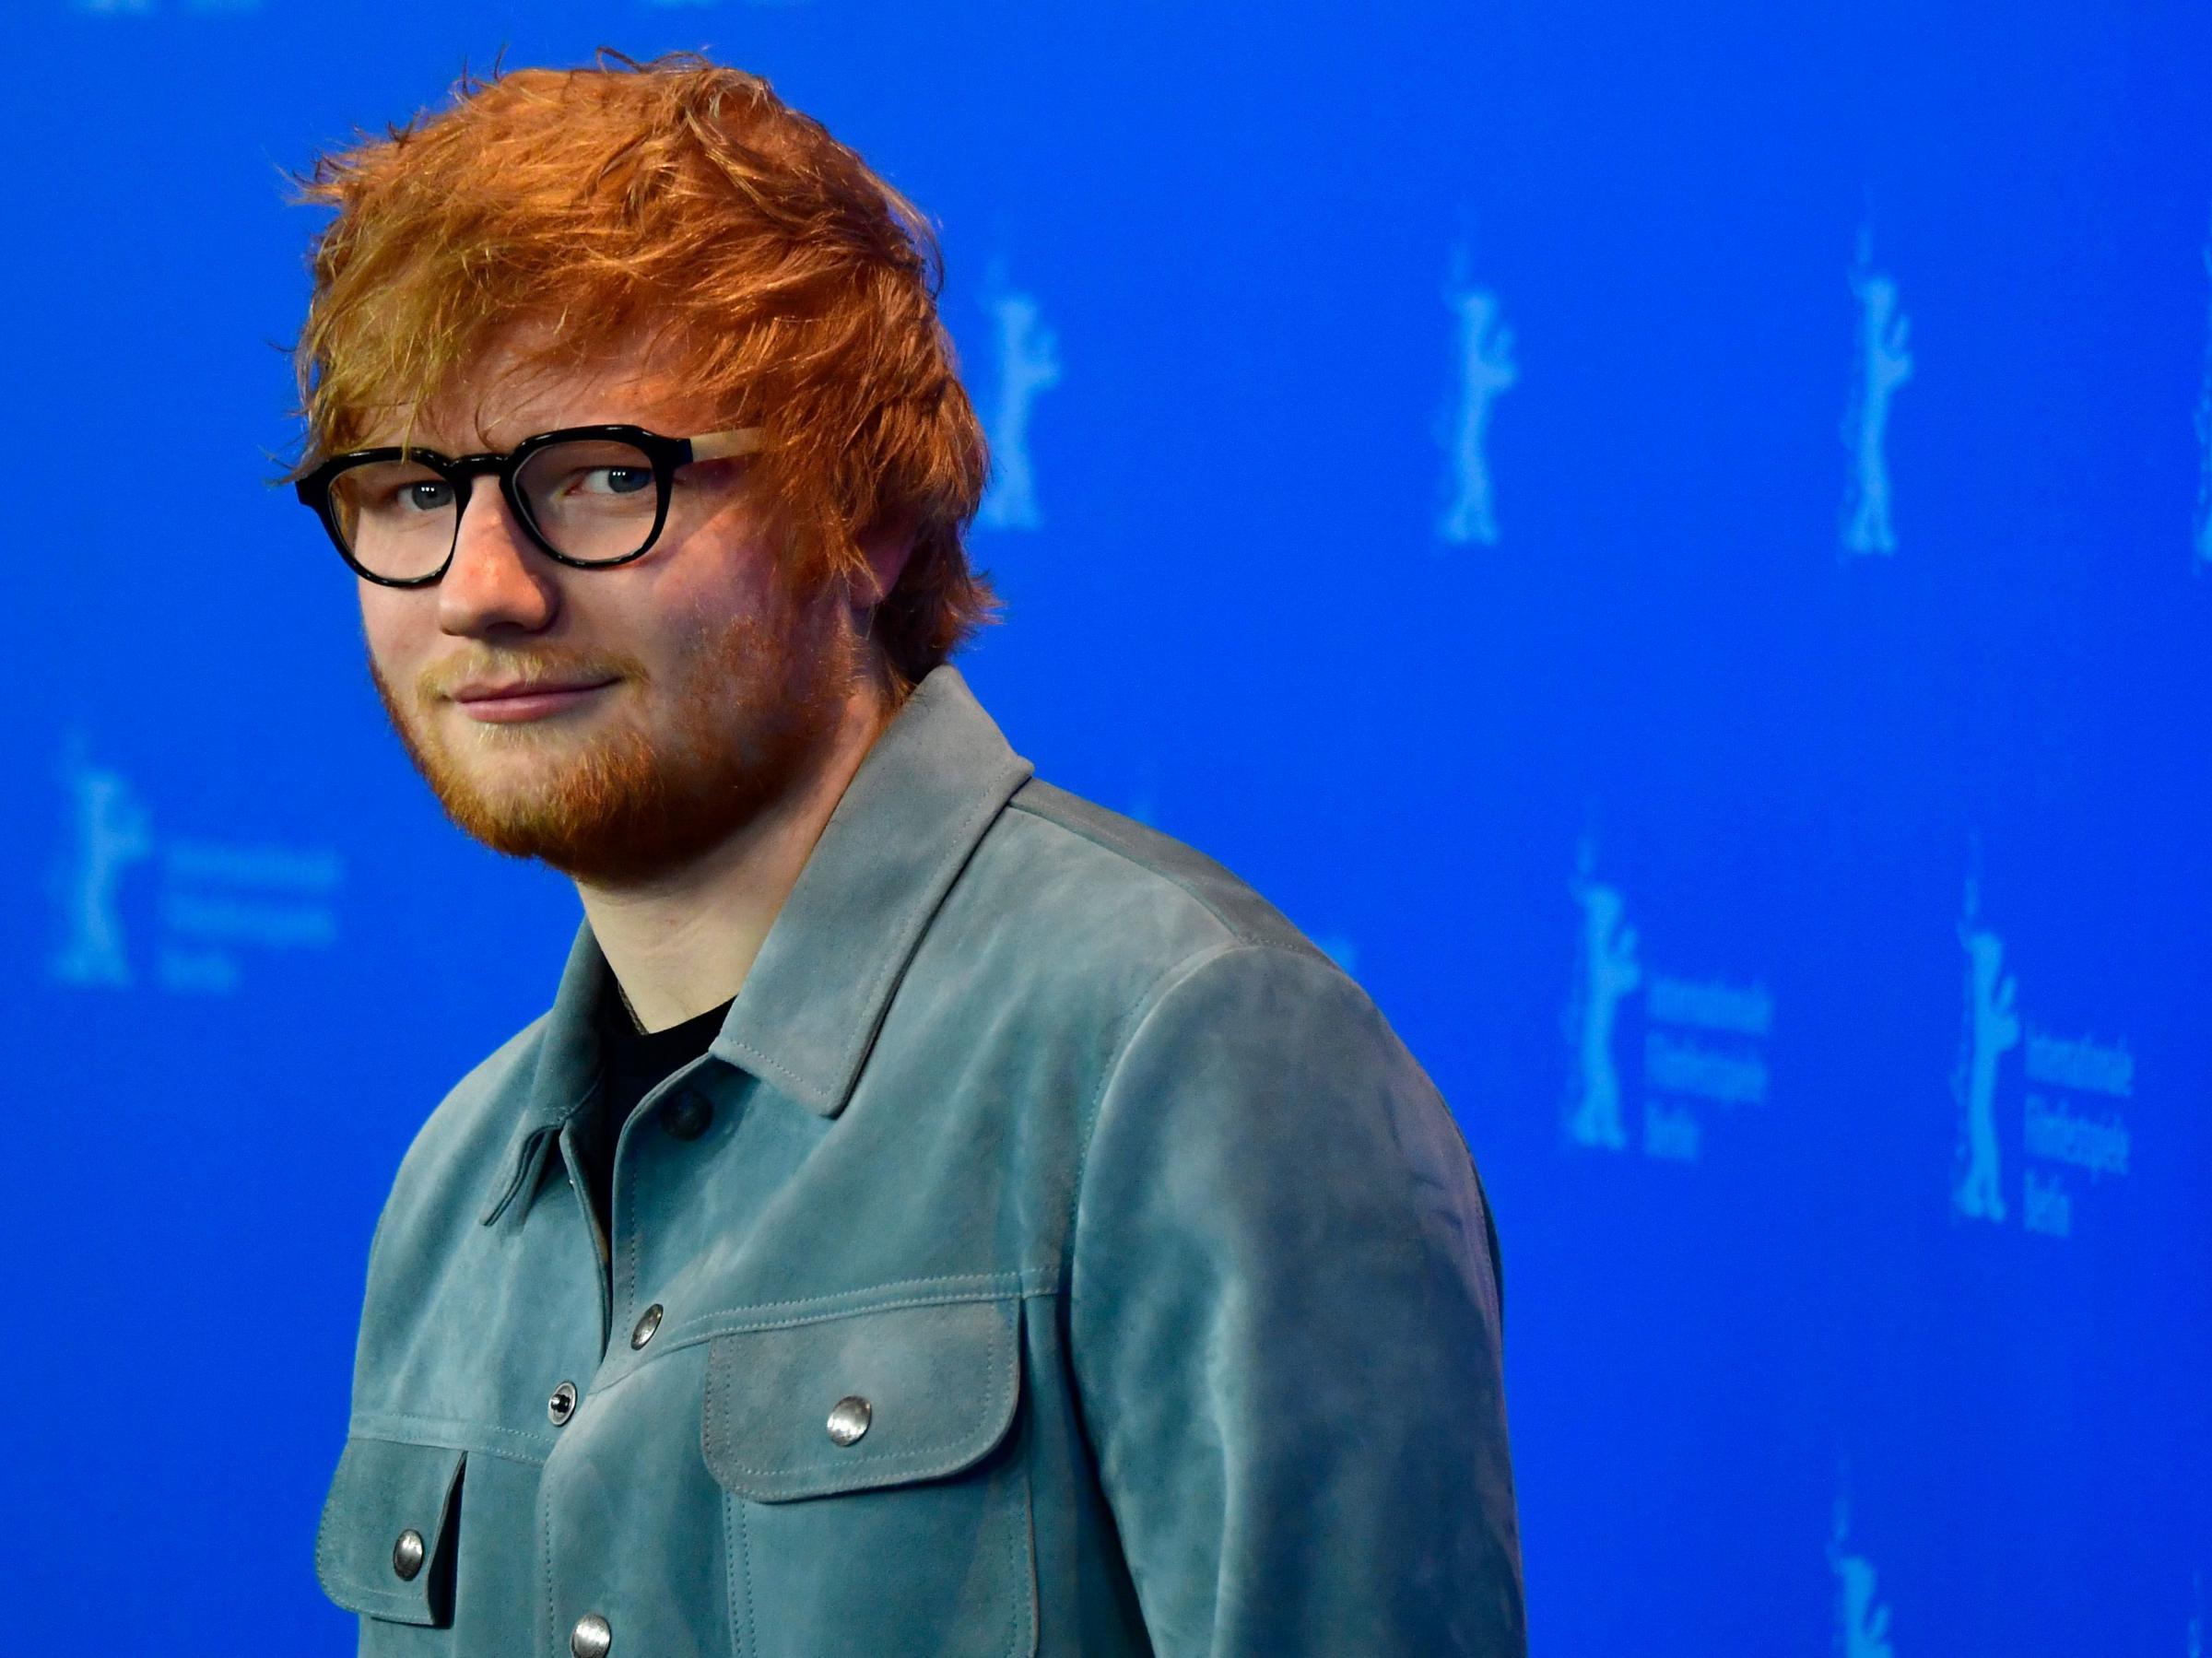 Ed Sheeran Sued For $100 Million Over Supposed Song Similarity | KUOW